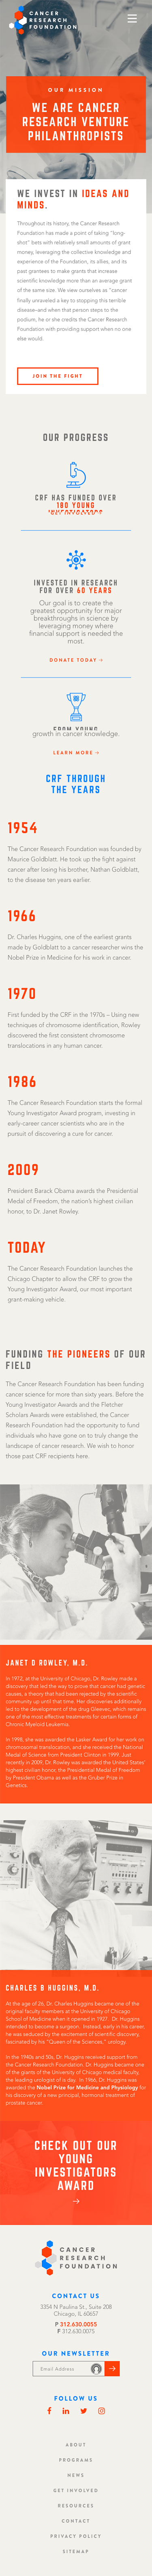 CANCER RESEARCH FOUNDATION